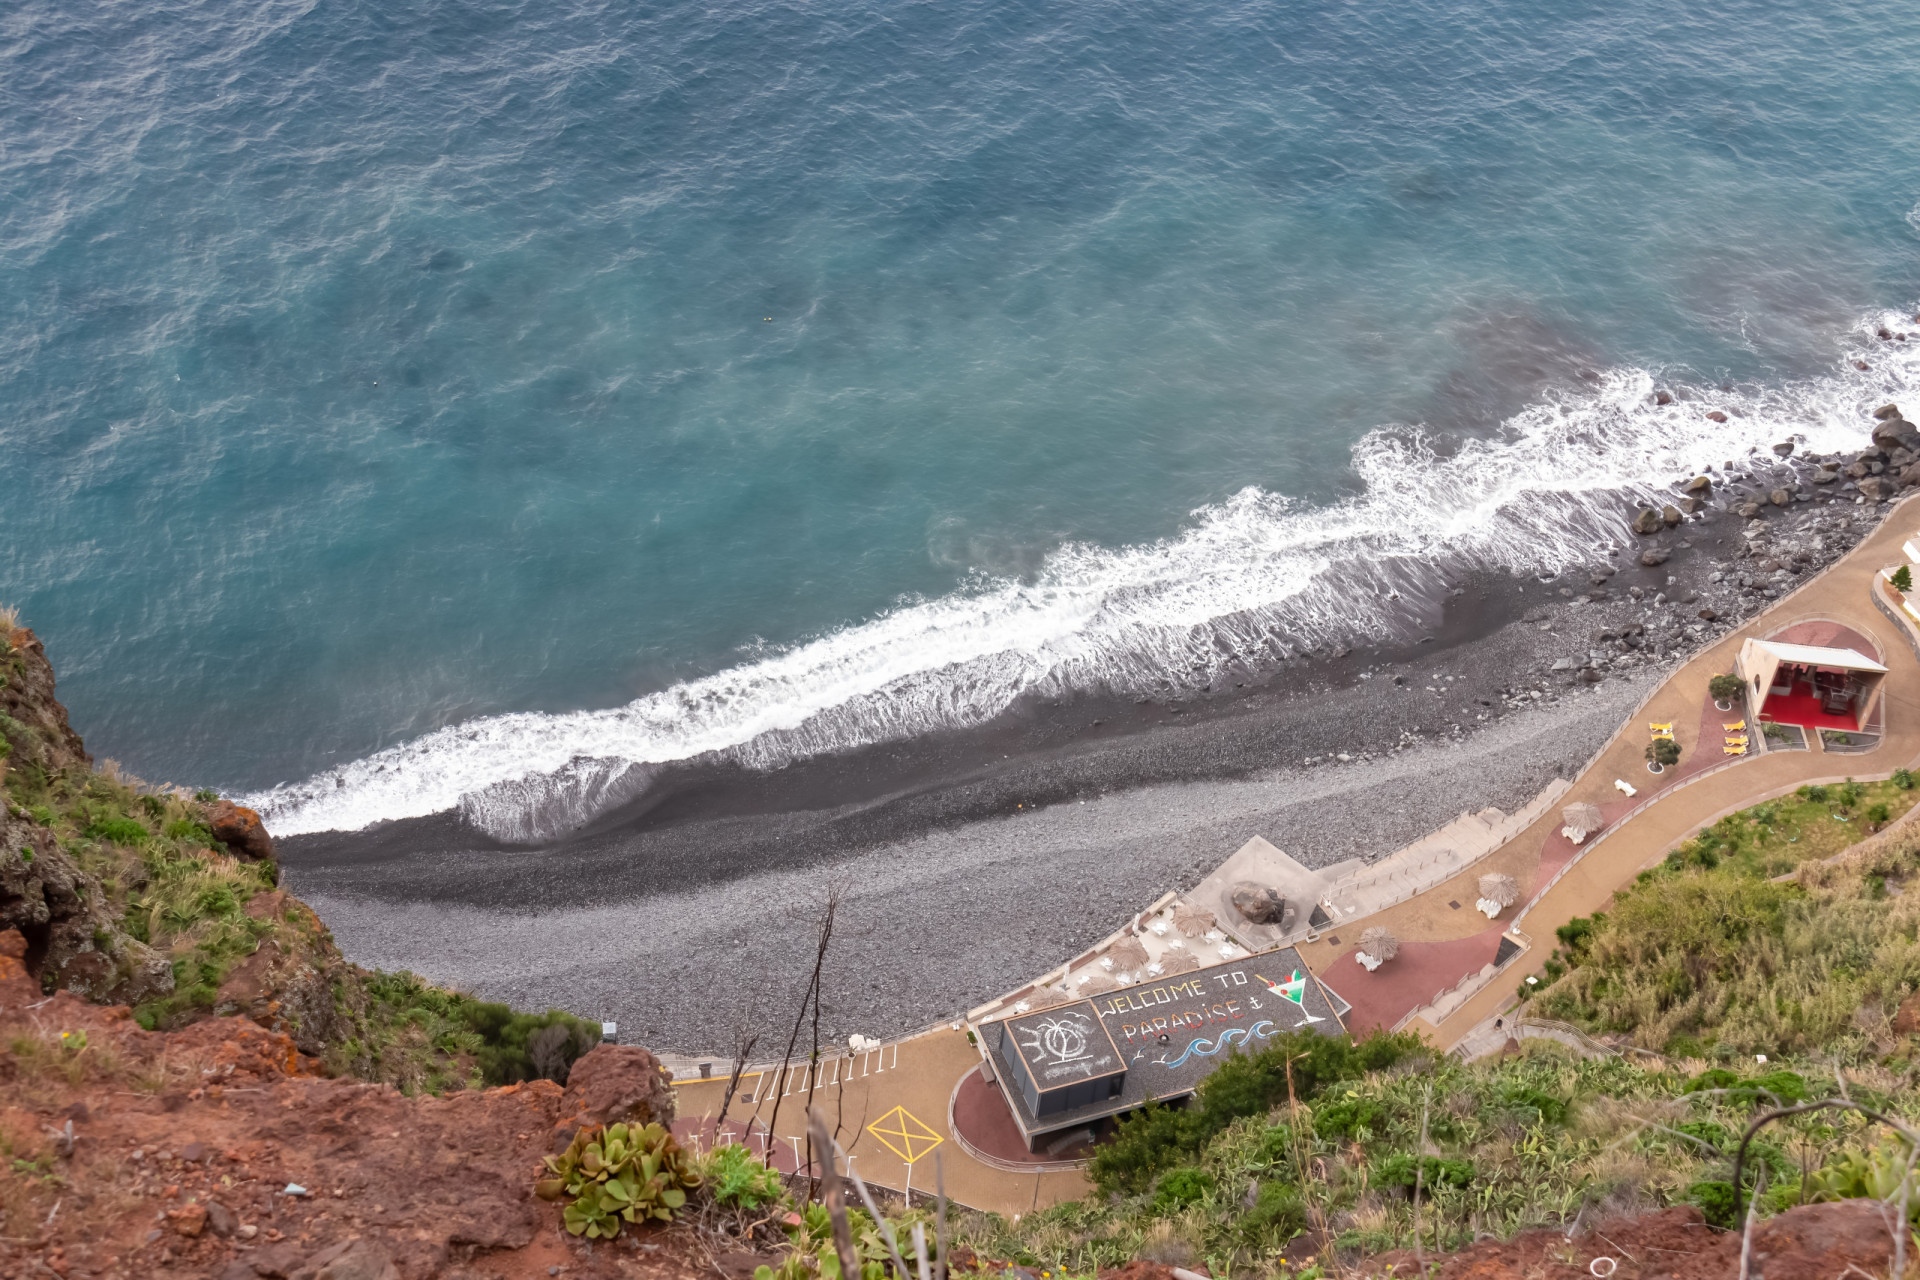 <p>Score: 3.996</p> <p>Integrated into a marine reserve on Madeira island, Praia do Garajau's natural conditions are perfect for scuba diving.</p><p>You may also like:<a href="https://www.starsinsider.com/n/204926?utm_source=msn.com&utm_medium=display&utm_campaign=referral_description&utm_content=697708en-en_selected"> Famous Americans who married foreigners</a></p>